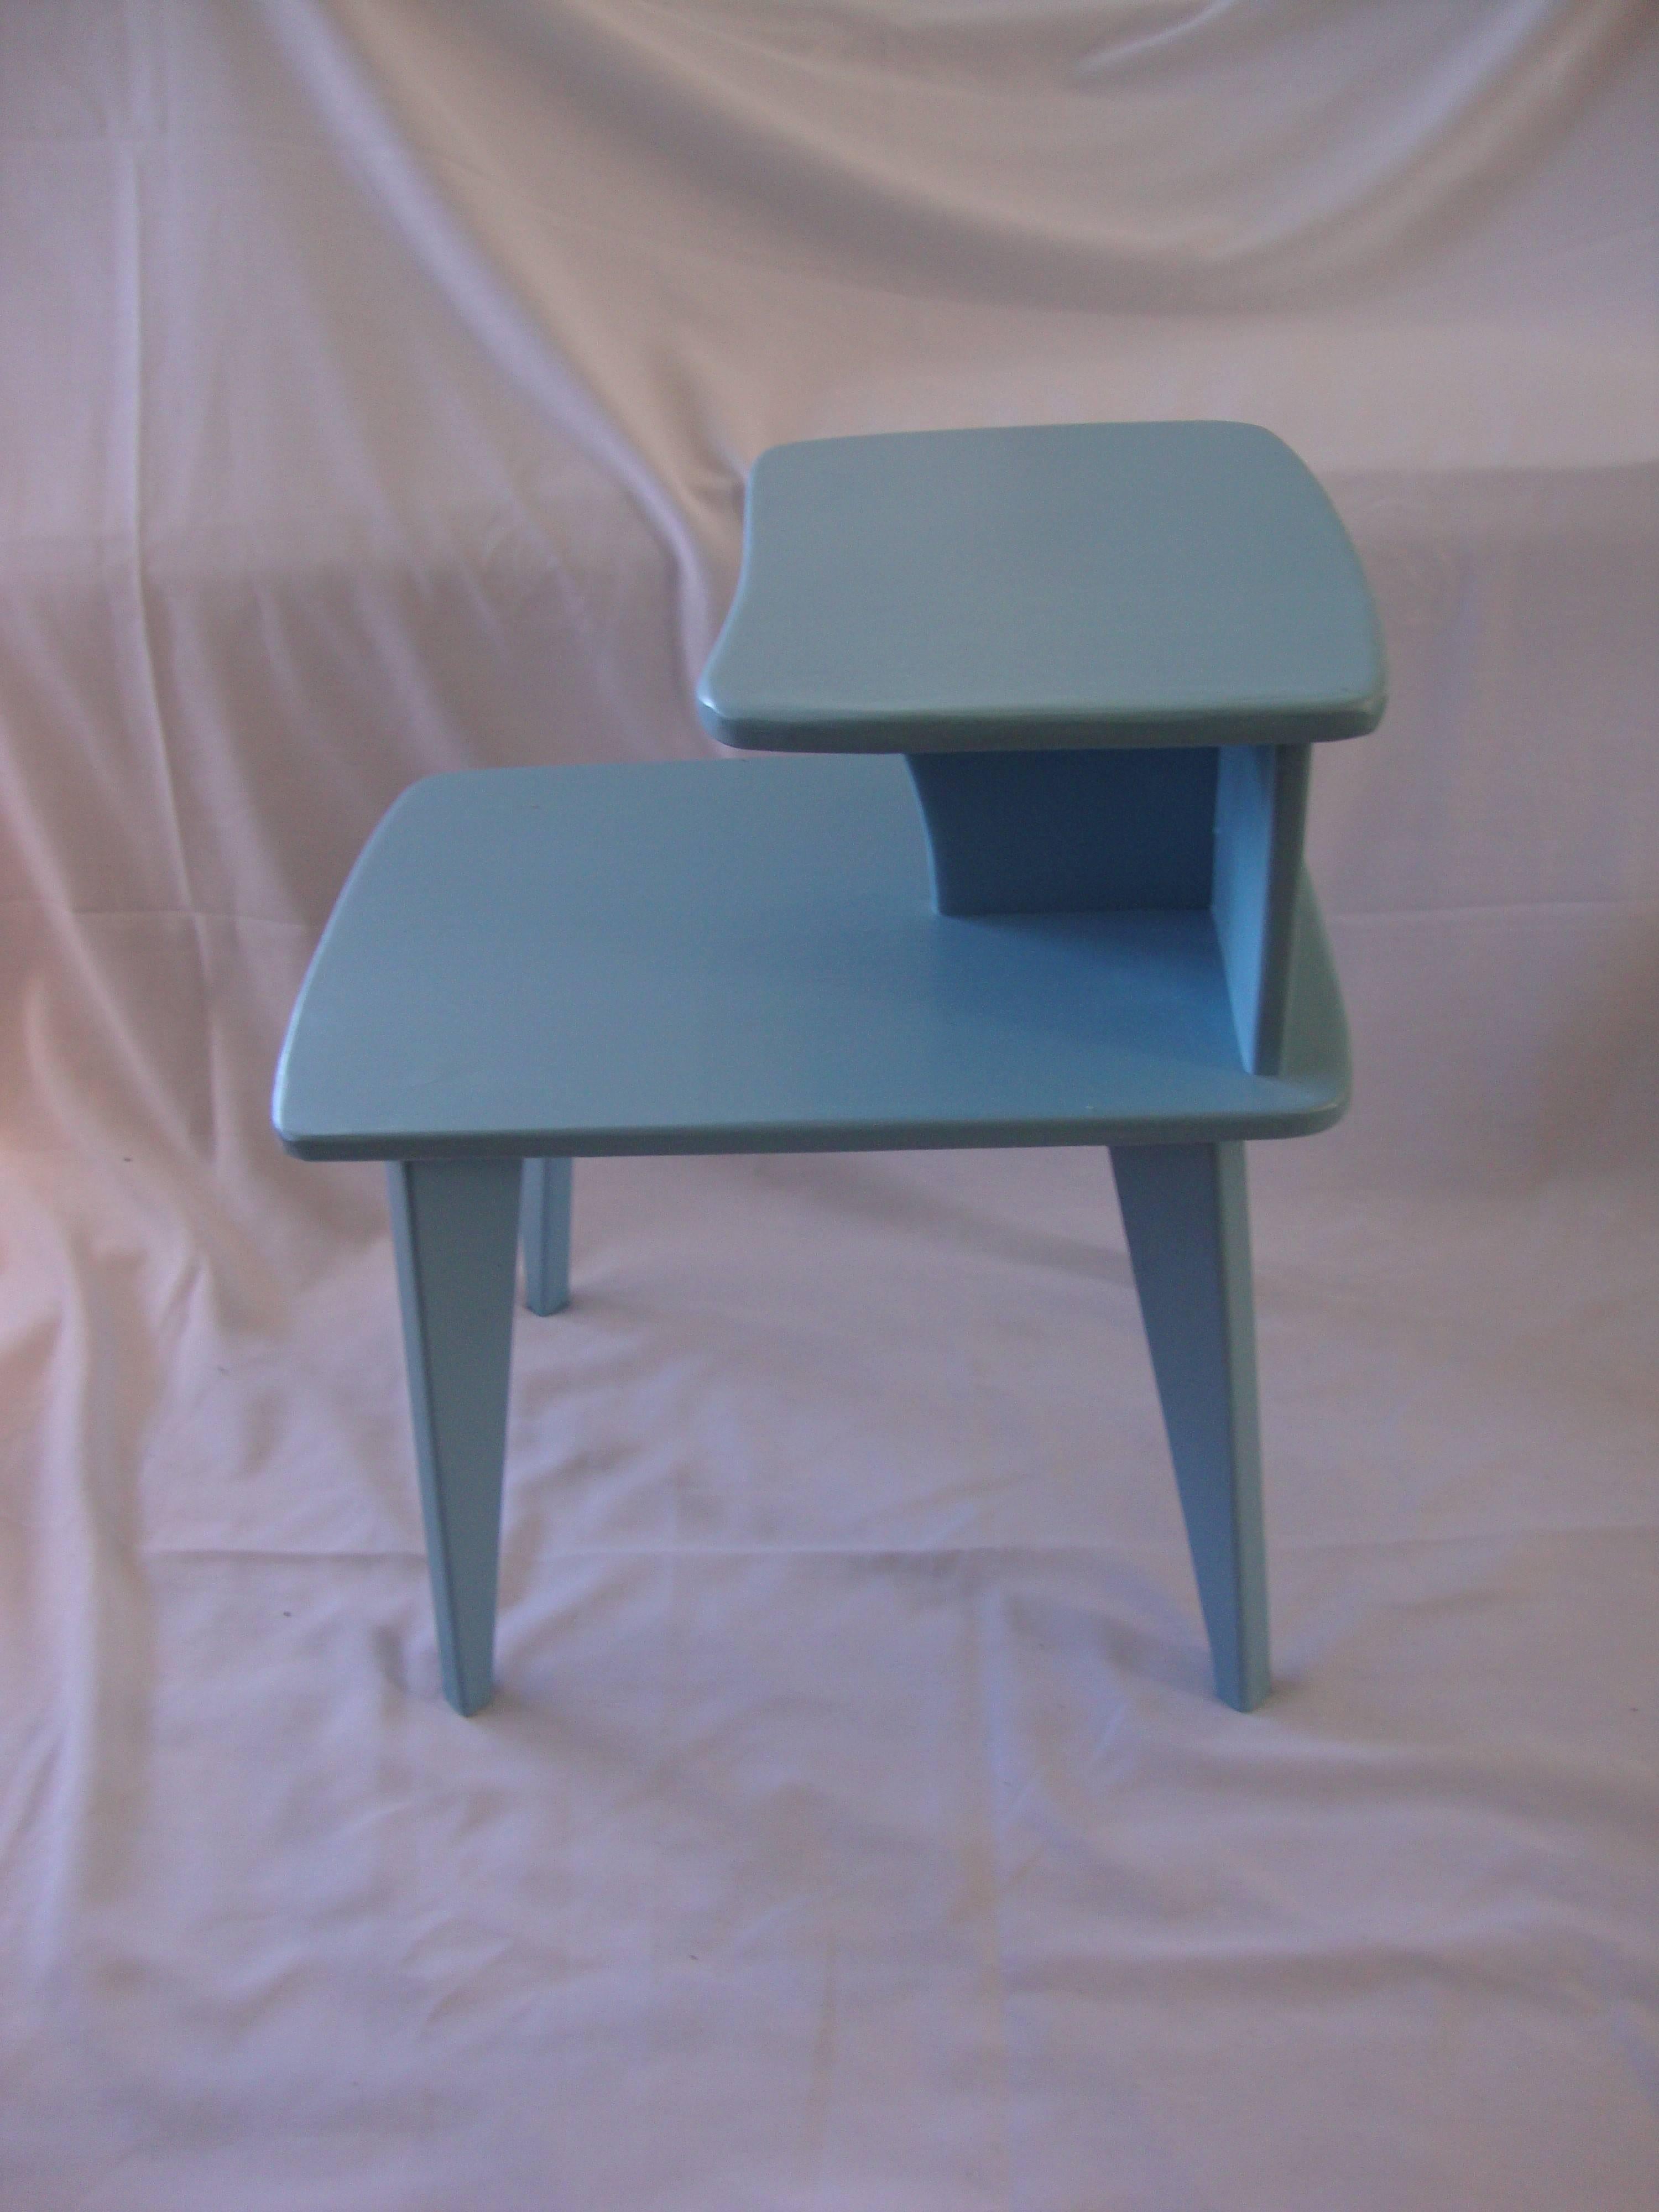 Retro duck blue side or end tables Mid-Century Modern design custom-made. In the style of Heywood Wakefield a pair of painted duck egg blue end tables. Made of pine handcrafted by the skilful shopper antiques. Petite size. 

We can custom make